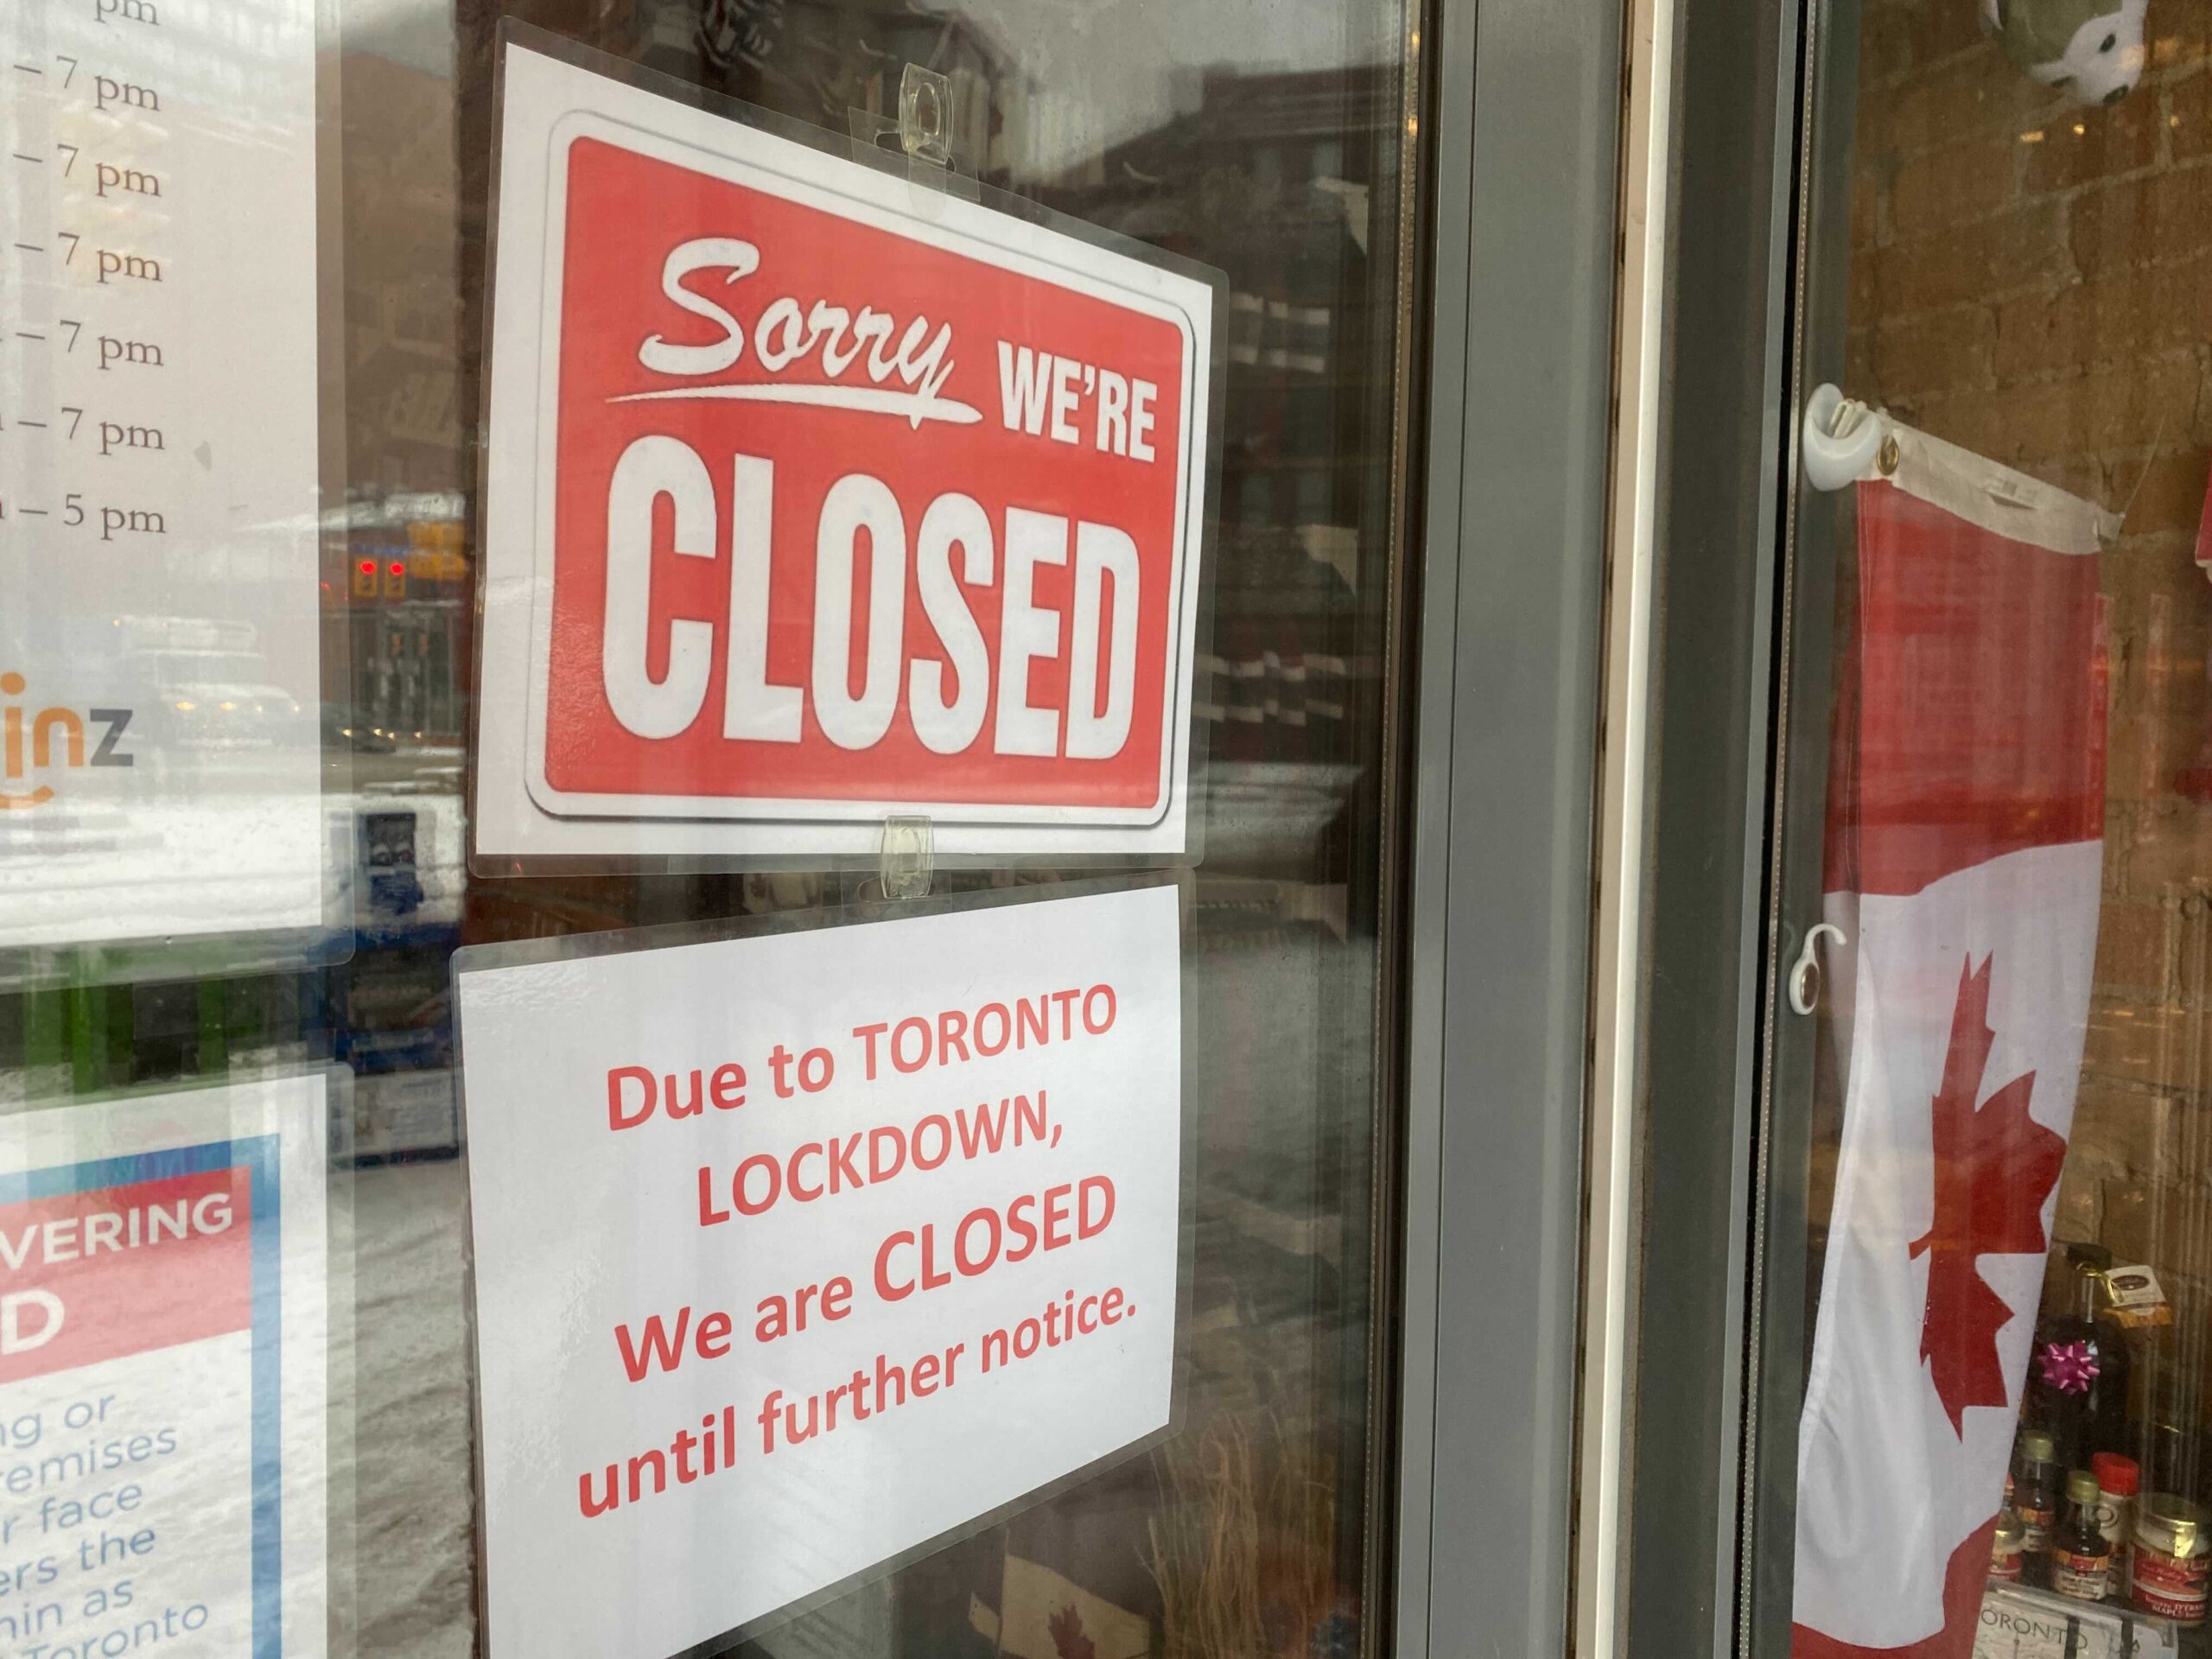 Closed business due to COVID-19 lockdowns. Photo: Dustin Fuhs